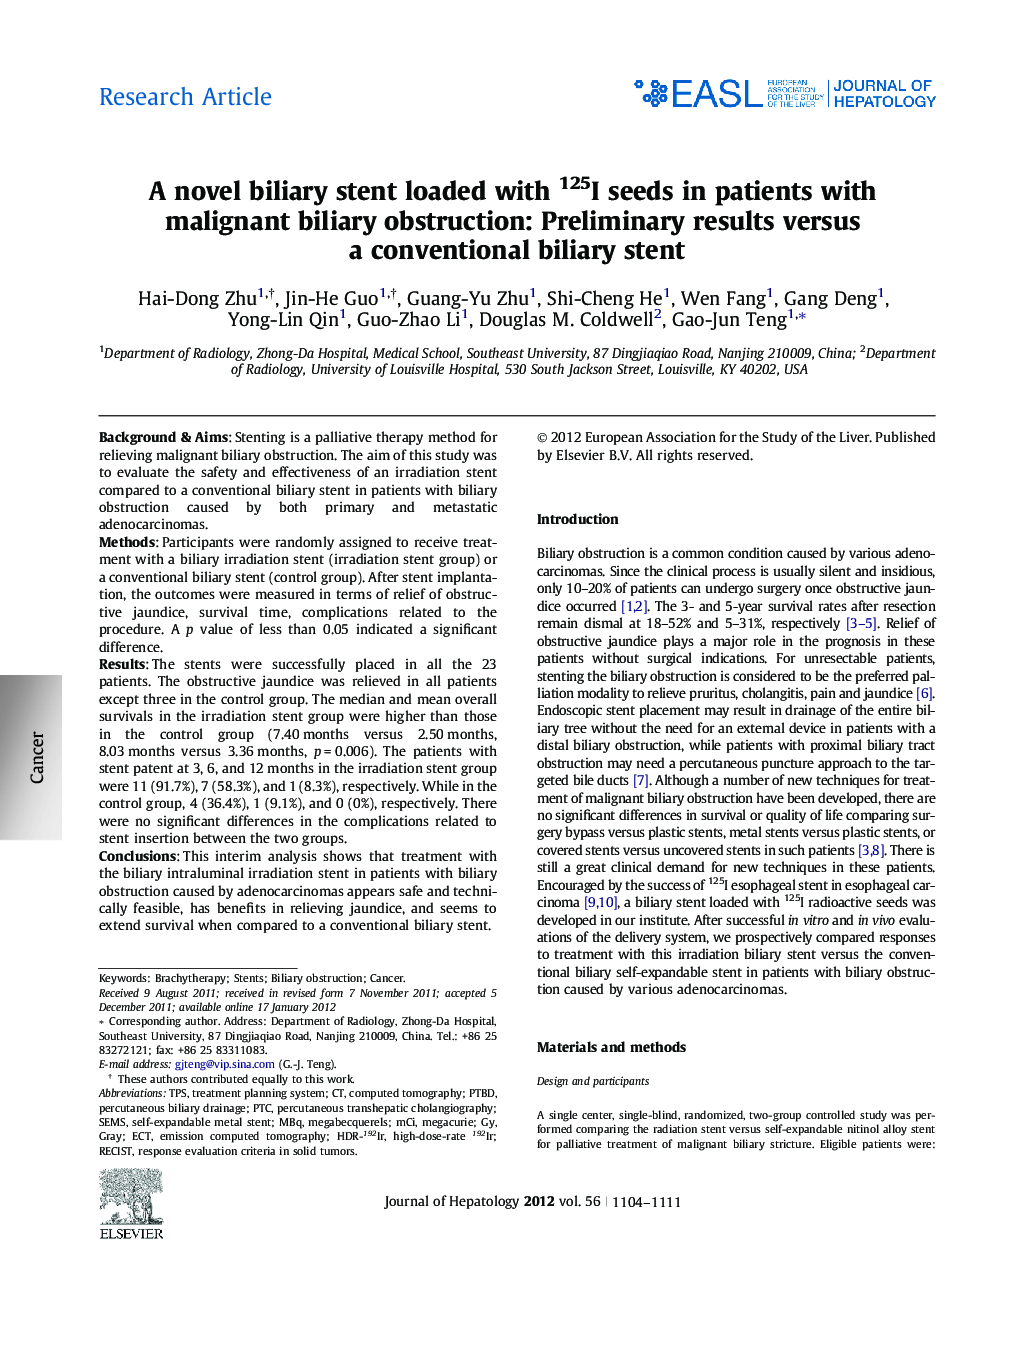 Research ArticleA novel biliary stent loaded with 125I seeds in patients with malignant biliary obstruction: Preliminary results versus a conventional biliary stent